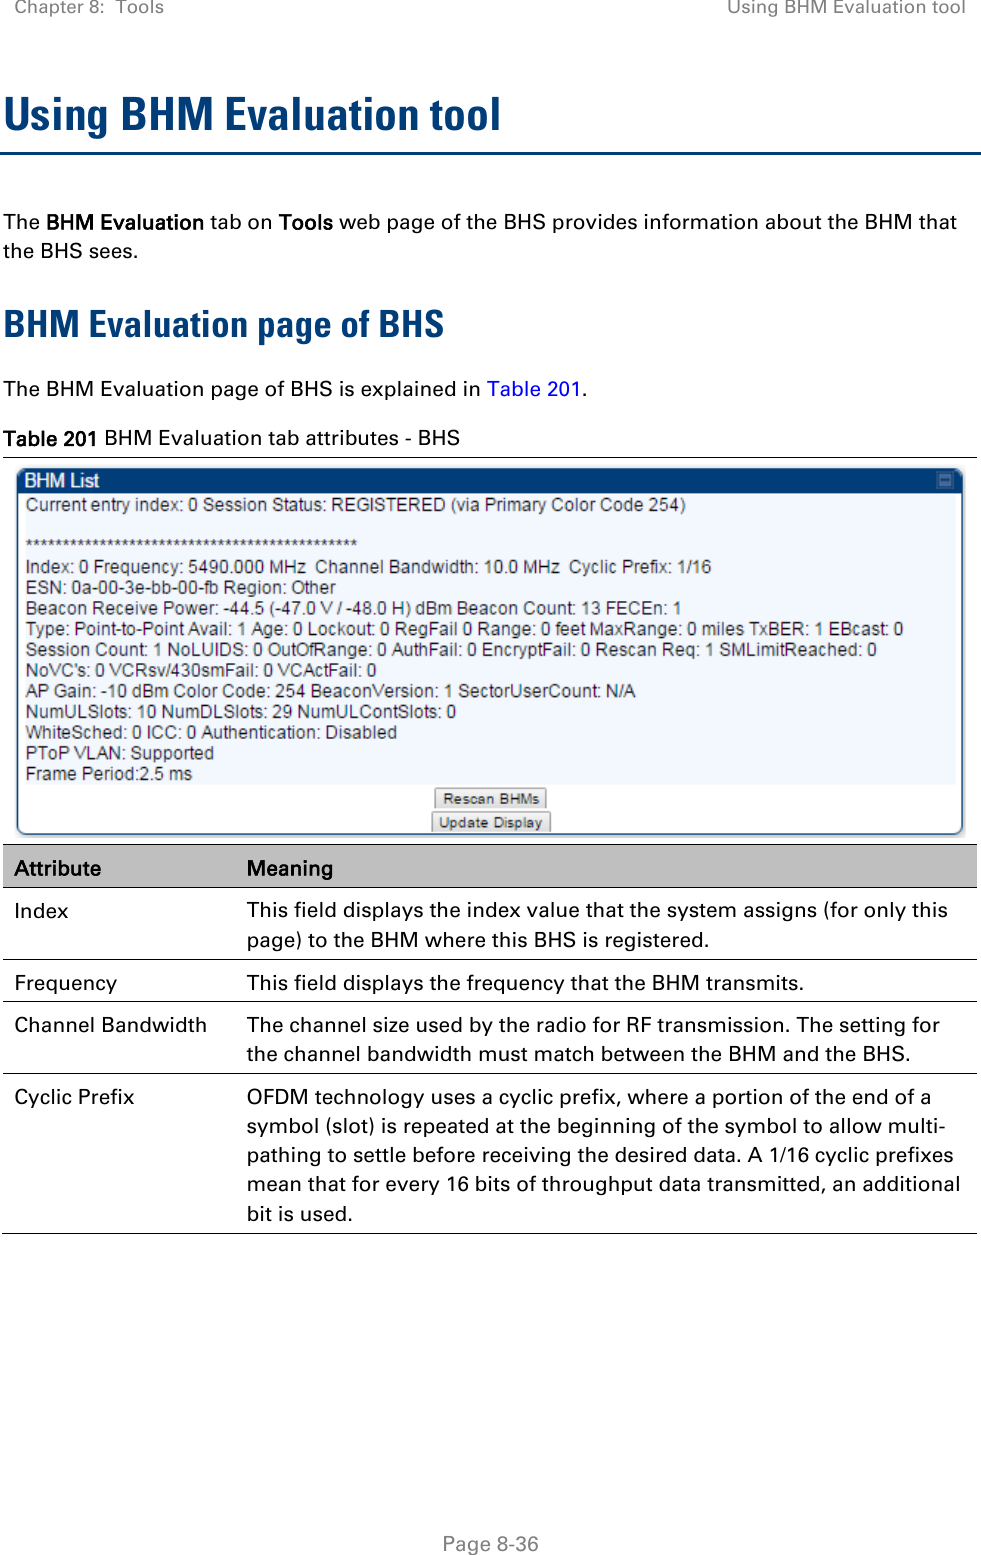 Chapter 8:  Tools Using BHM Evaluation tool   Page 8-36 Using BHM Evaluation tool The BHM Evaluation tab on Tools web page of the BHS provides information about the BHM that the BHS sees. BHM Evaluation page of BHS The BHM Evaluation page of BHS is explained in Table 201. Table 201 BHM Evaluation tab attributes - BHS  Attribute Meaning Index  This field displays the index value that the system assigns (for only this page) to the BHM where this BHS is registered. Frequency  This field displays the frequency that the BHM transmits. Channel Bandwidth The channel size used by the radio for RF transmission. The setting for the channel bandwidth must match between the BHM and the BHS.  Cyclic Prefix OFDM technology uses a cyclic prefix, where a portion of the end of a symbol (slot) is repeated at the beginning of the symbol to allow multi-pathing to settle before receiving the desired data. A 1/16 cyclic prefixes mean that for every 16 bits of throughput data transmitted, an additional bit is used. 